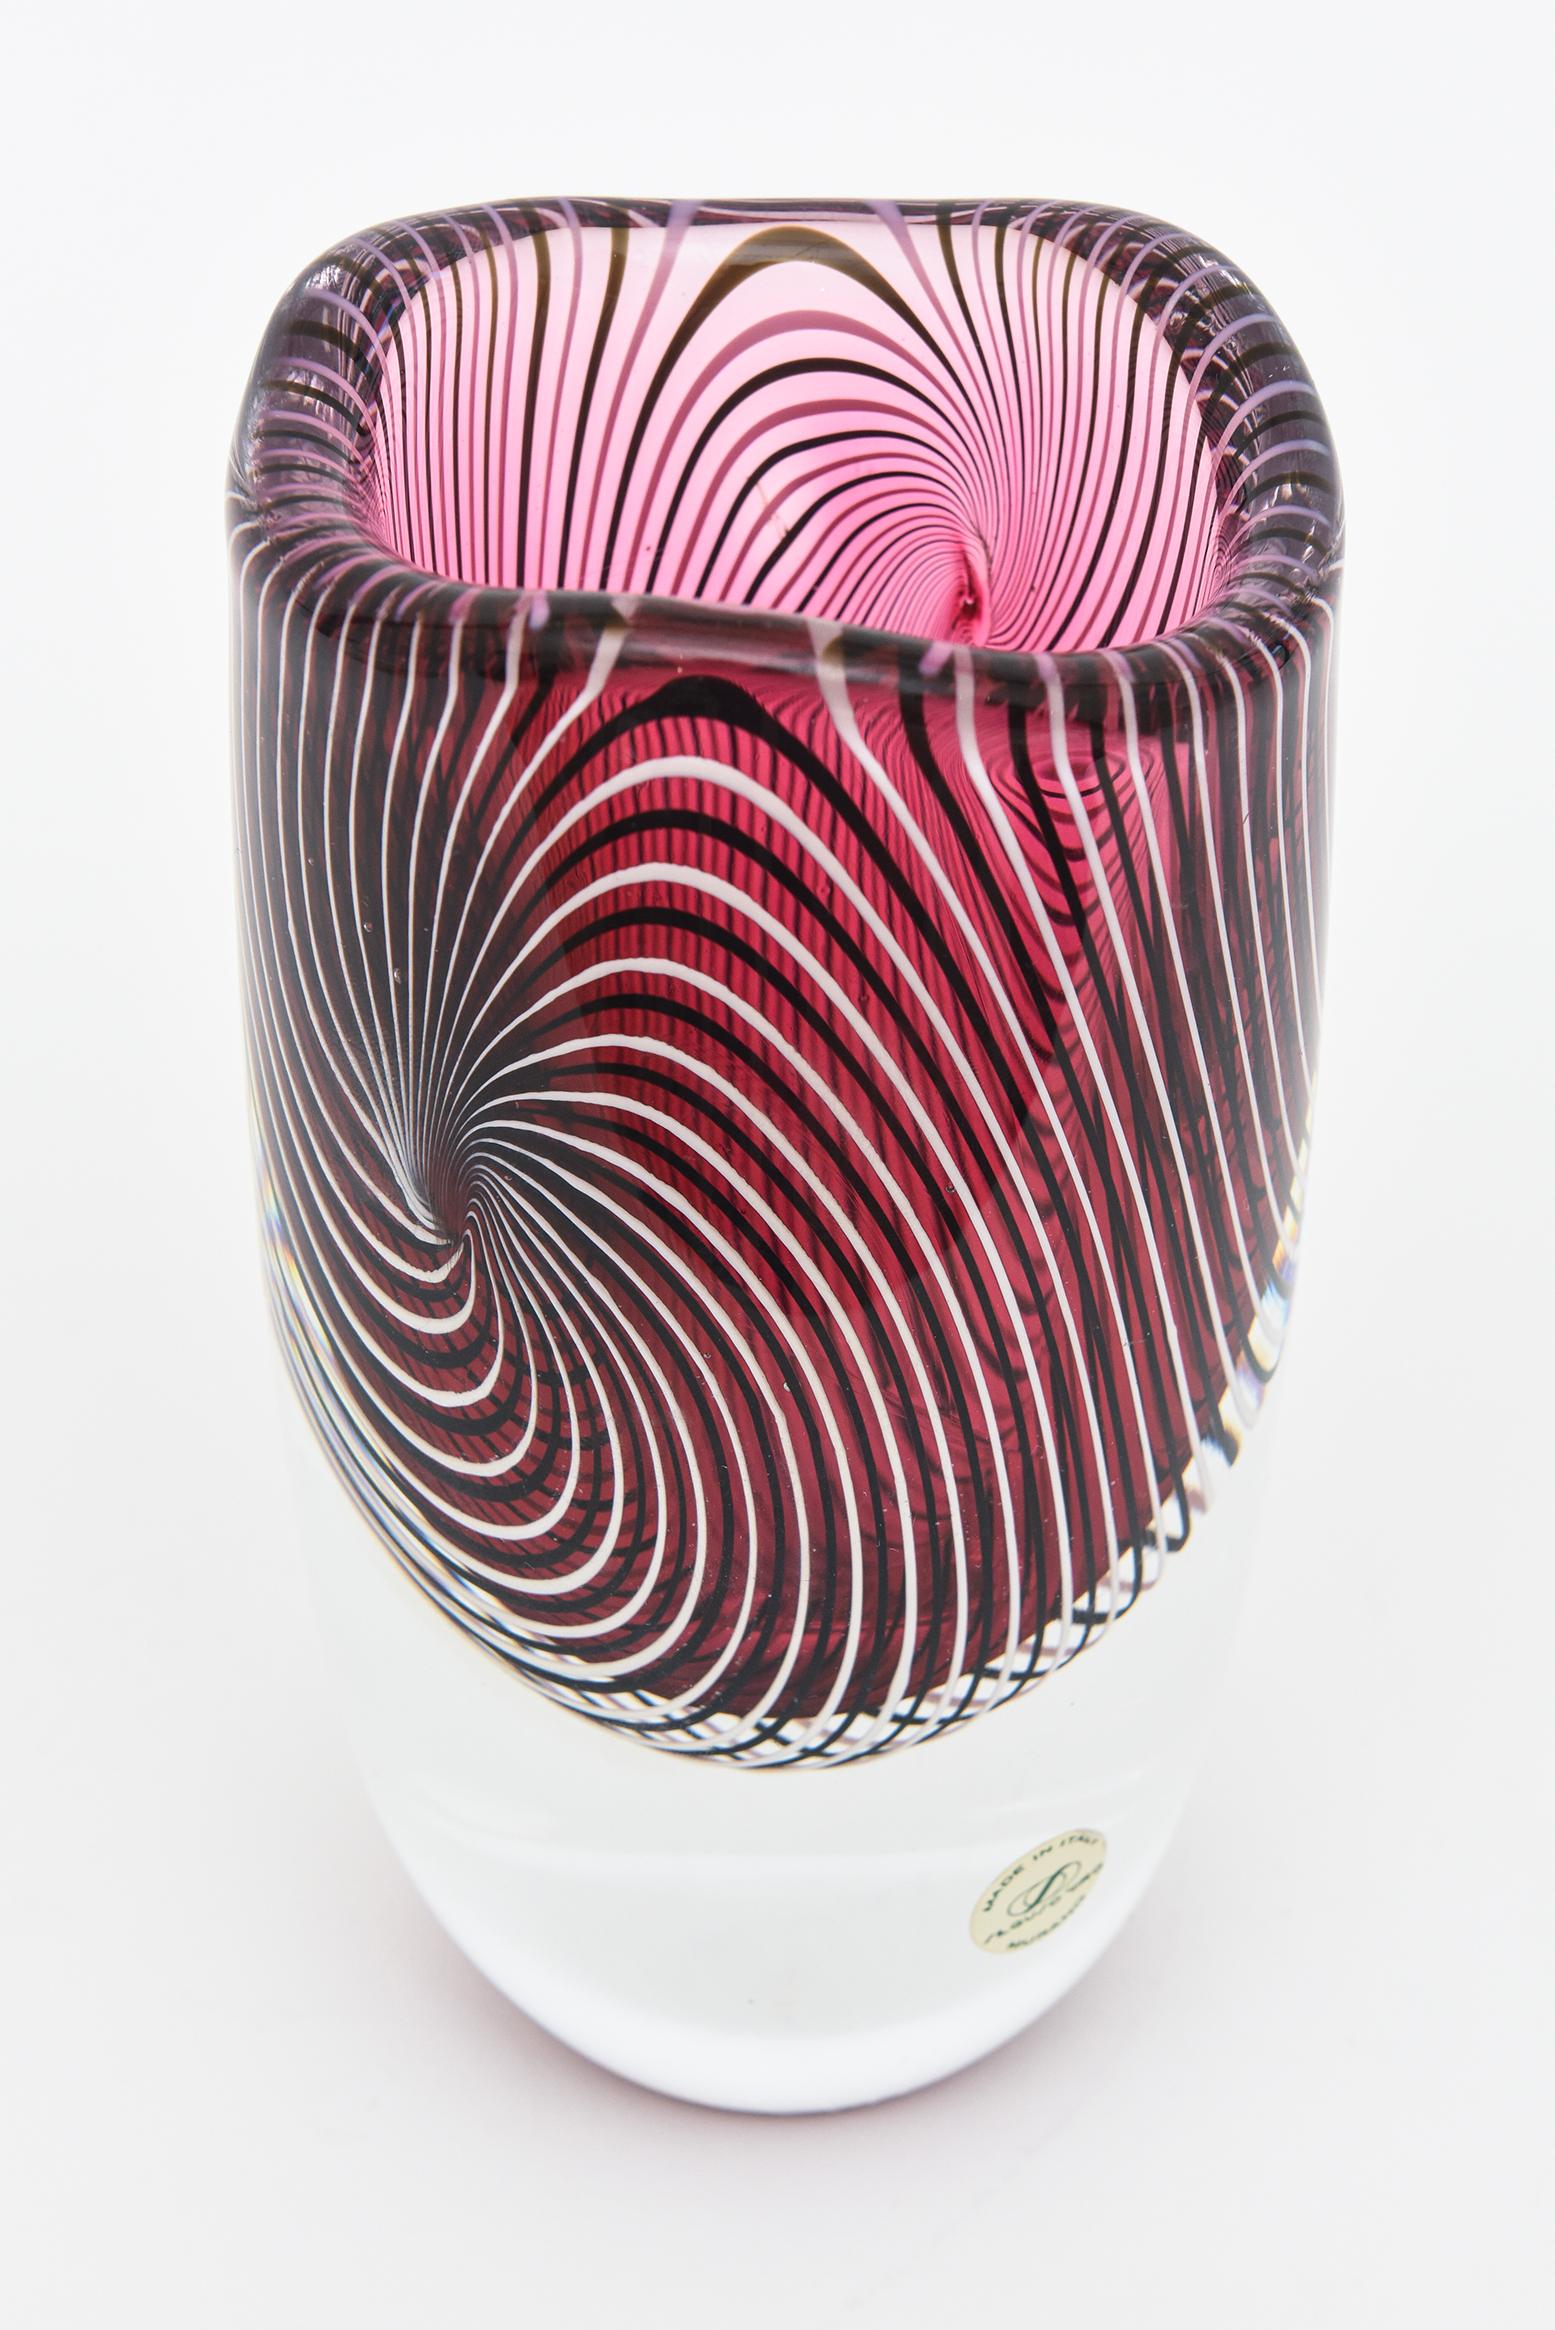 Vintage Murano Seguso Spiral Optic Striped Deep Pink And White Vase or Vessel For Sale 2